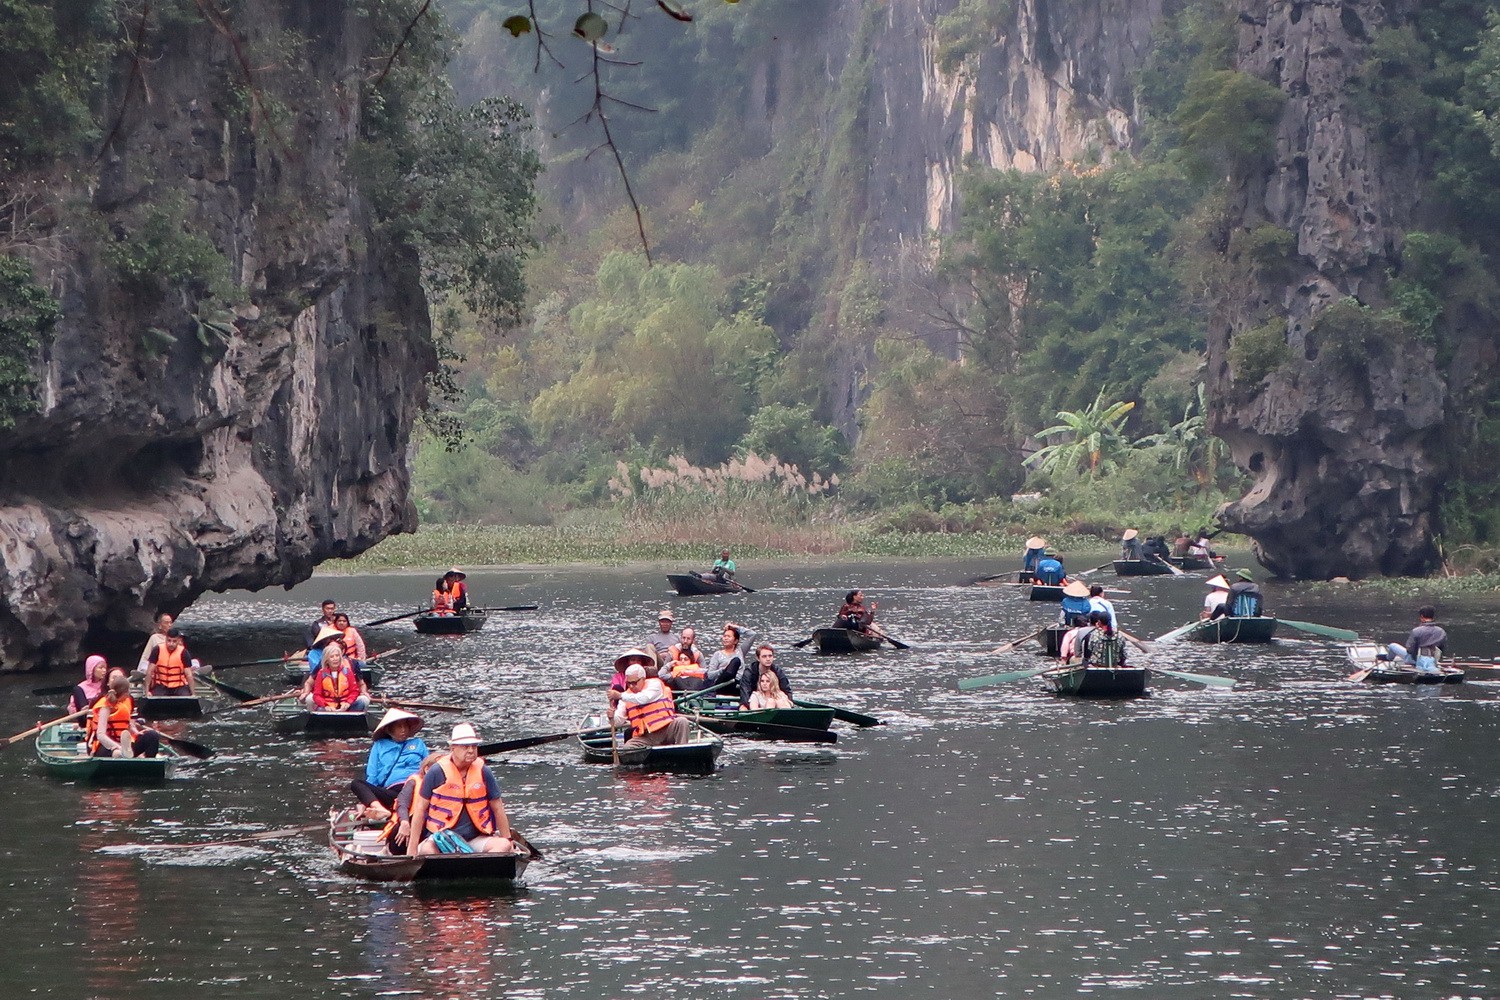 A lot of boats on Tam Coc River